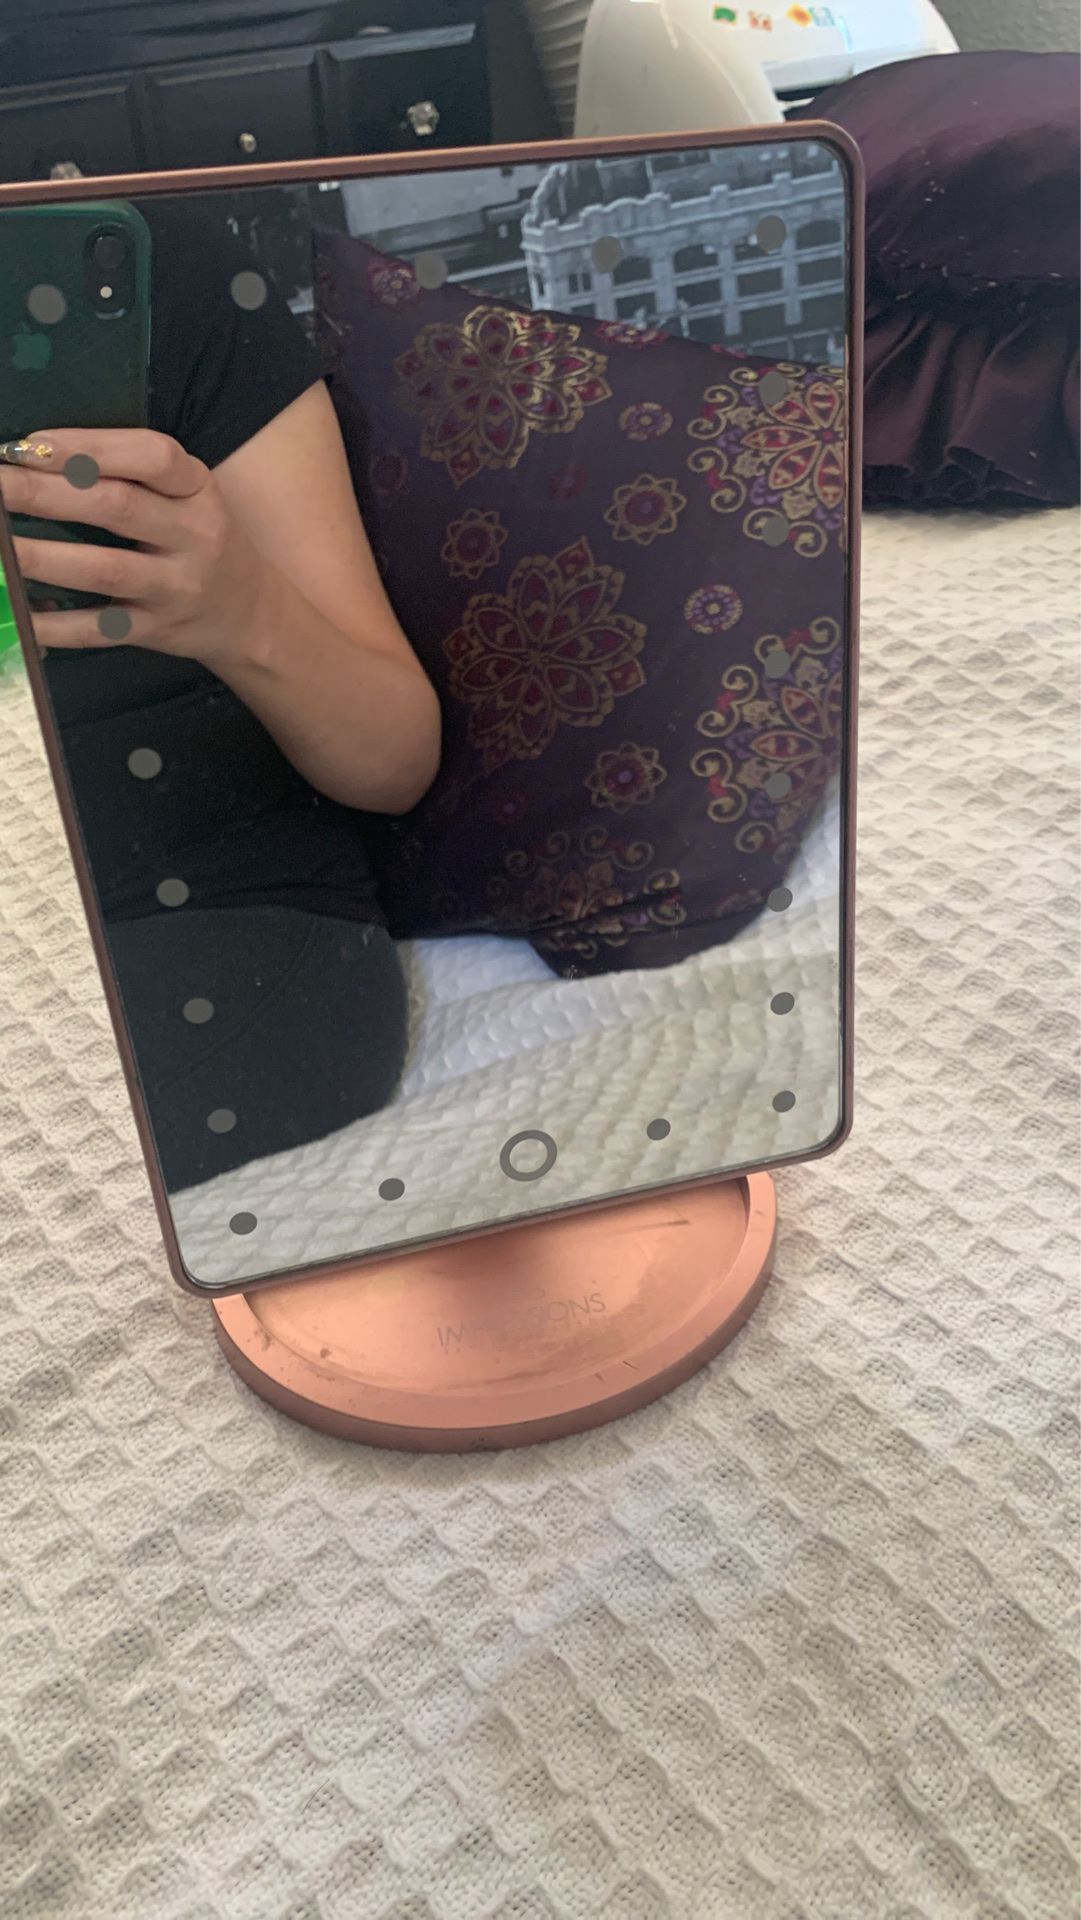 Makeup mirror from impressions vanity please no low ballers!